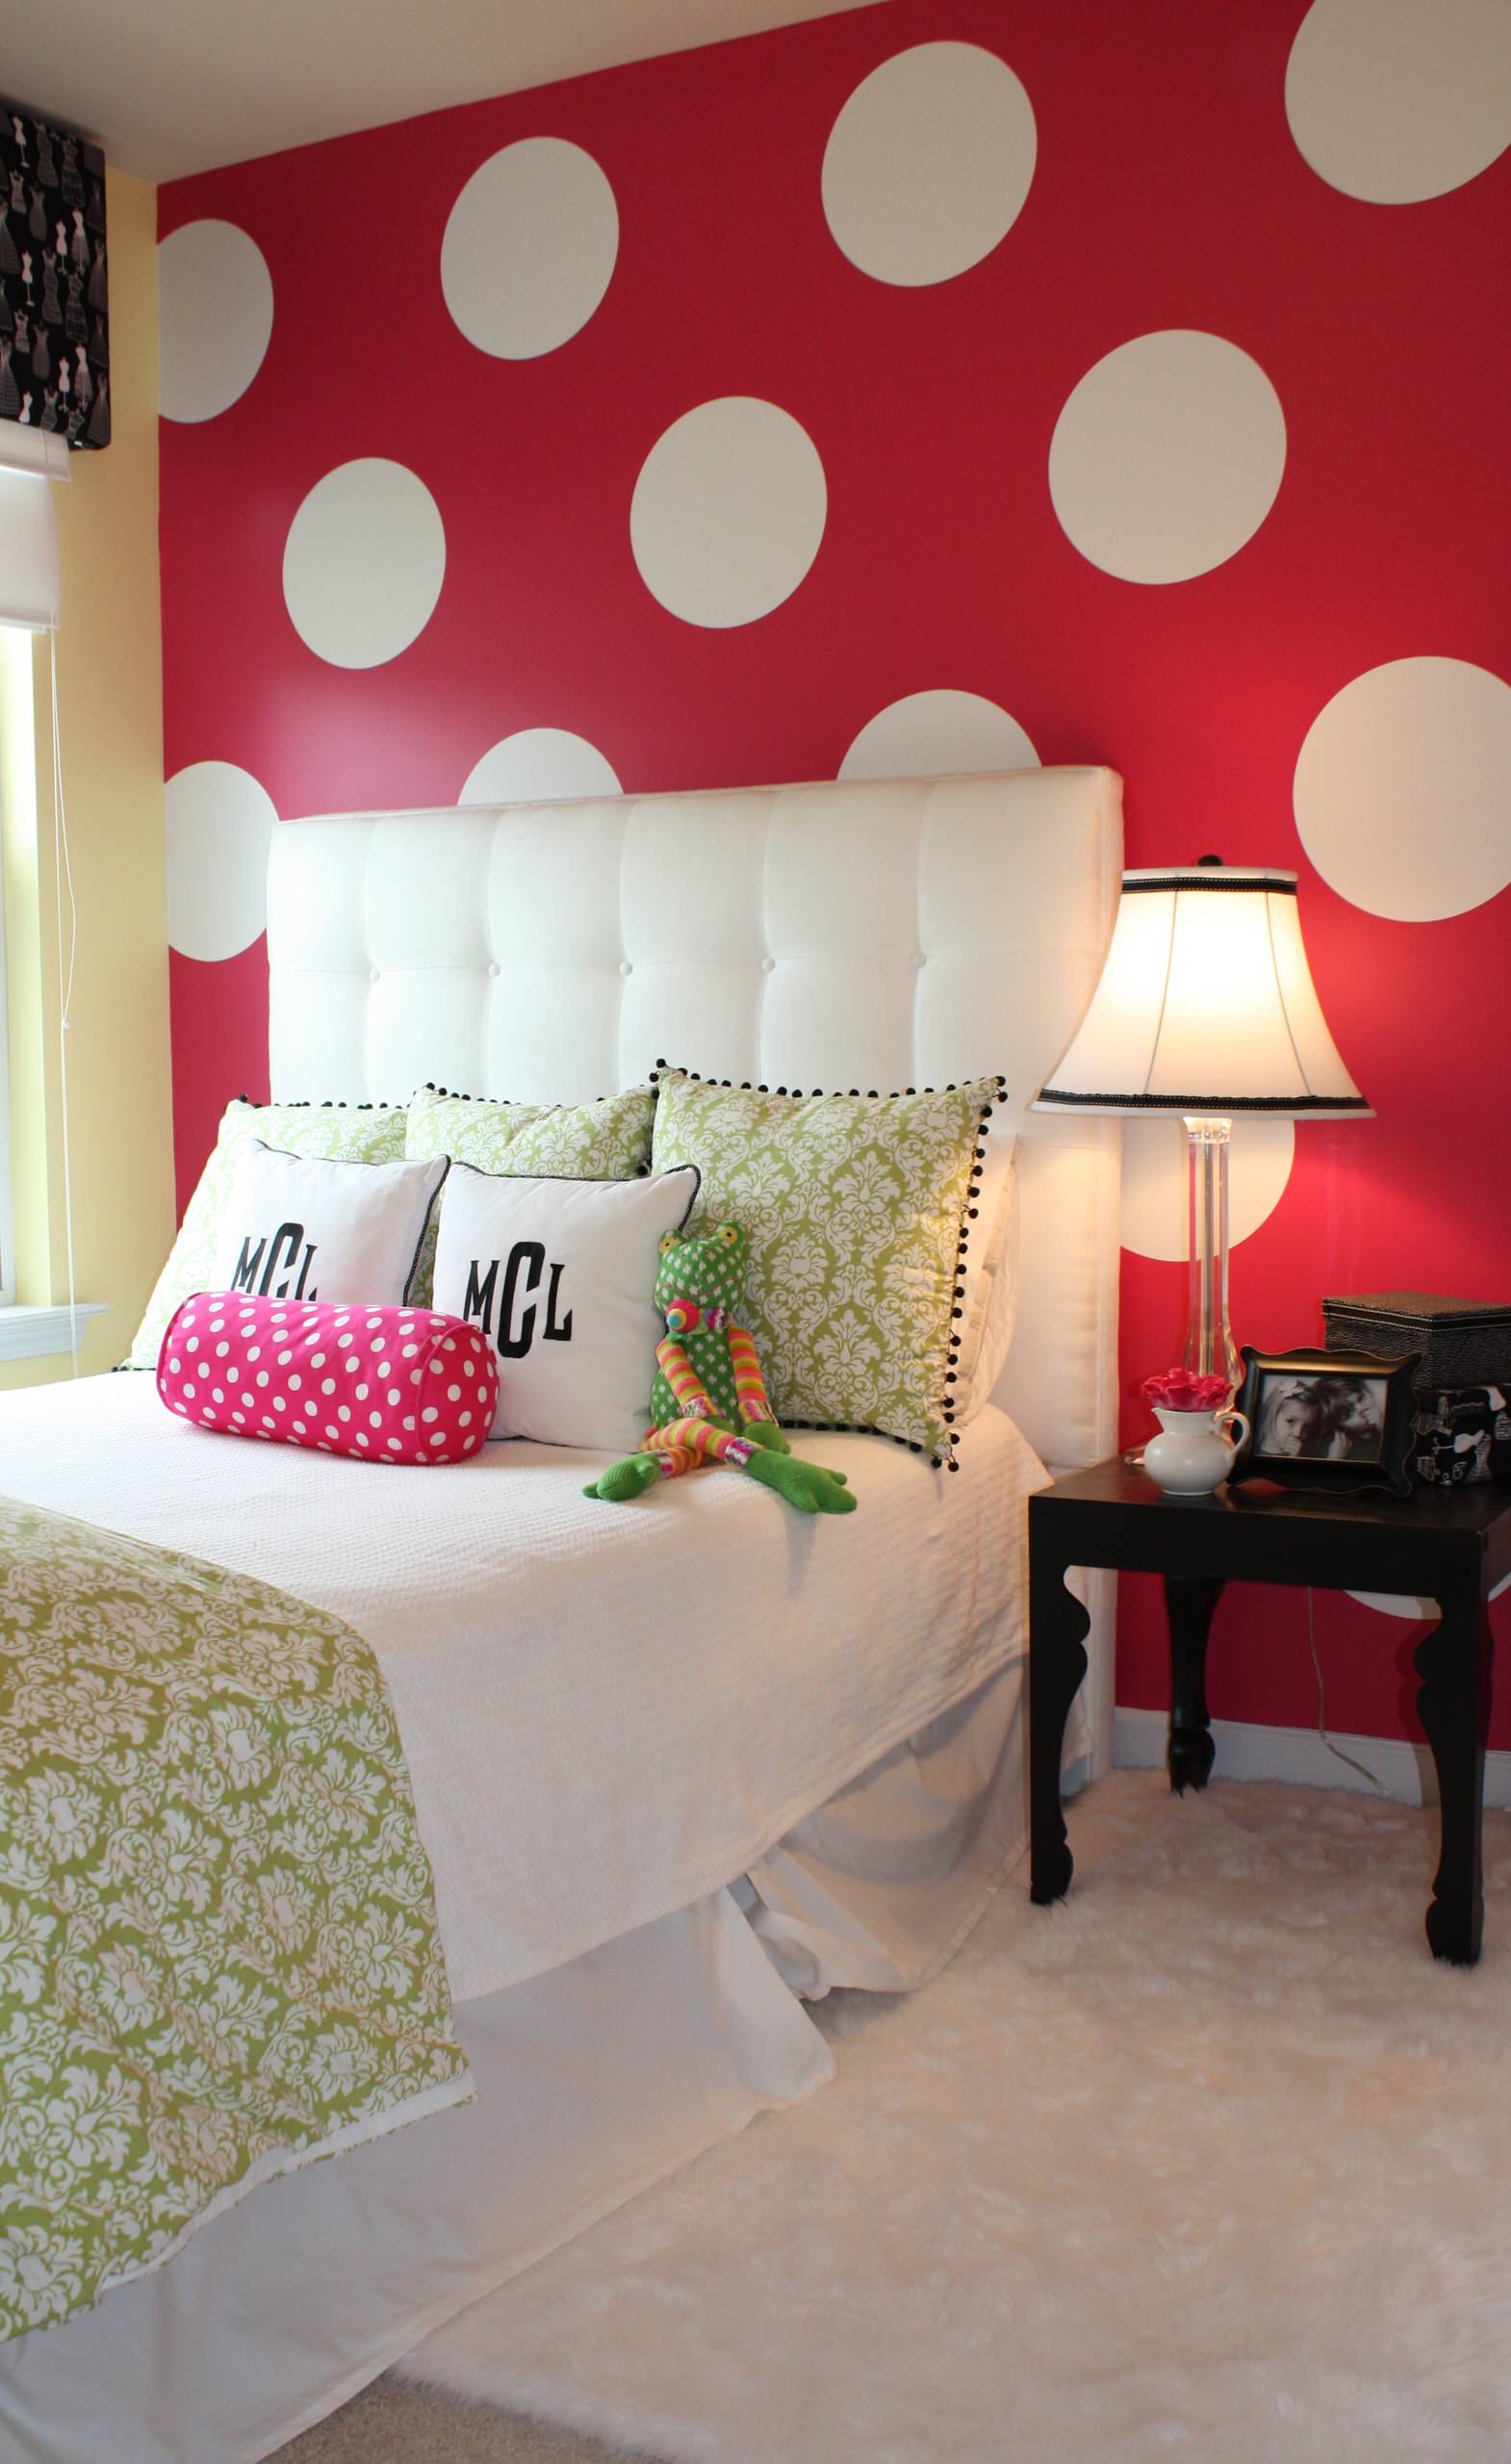 Wall Painting Designs For Bedroom For Girls Chalkboard Wall Paint Can Bring Along A Total